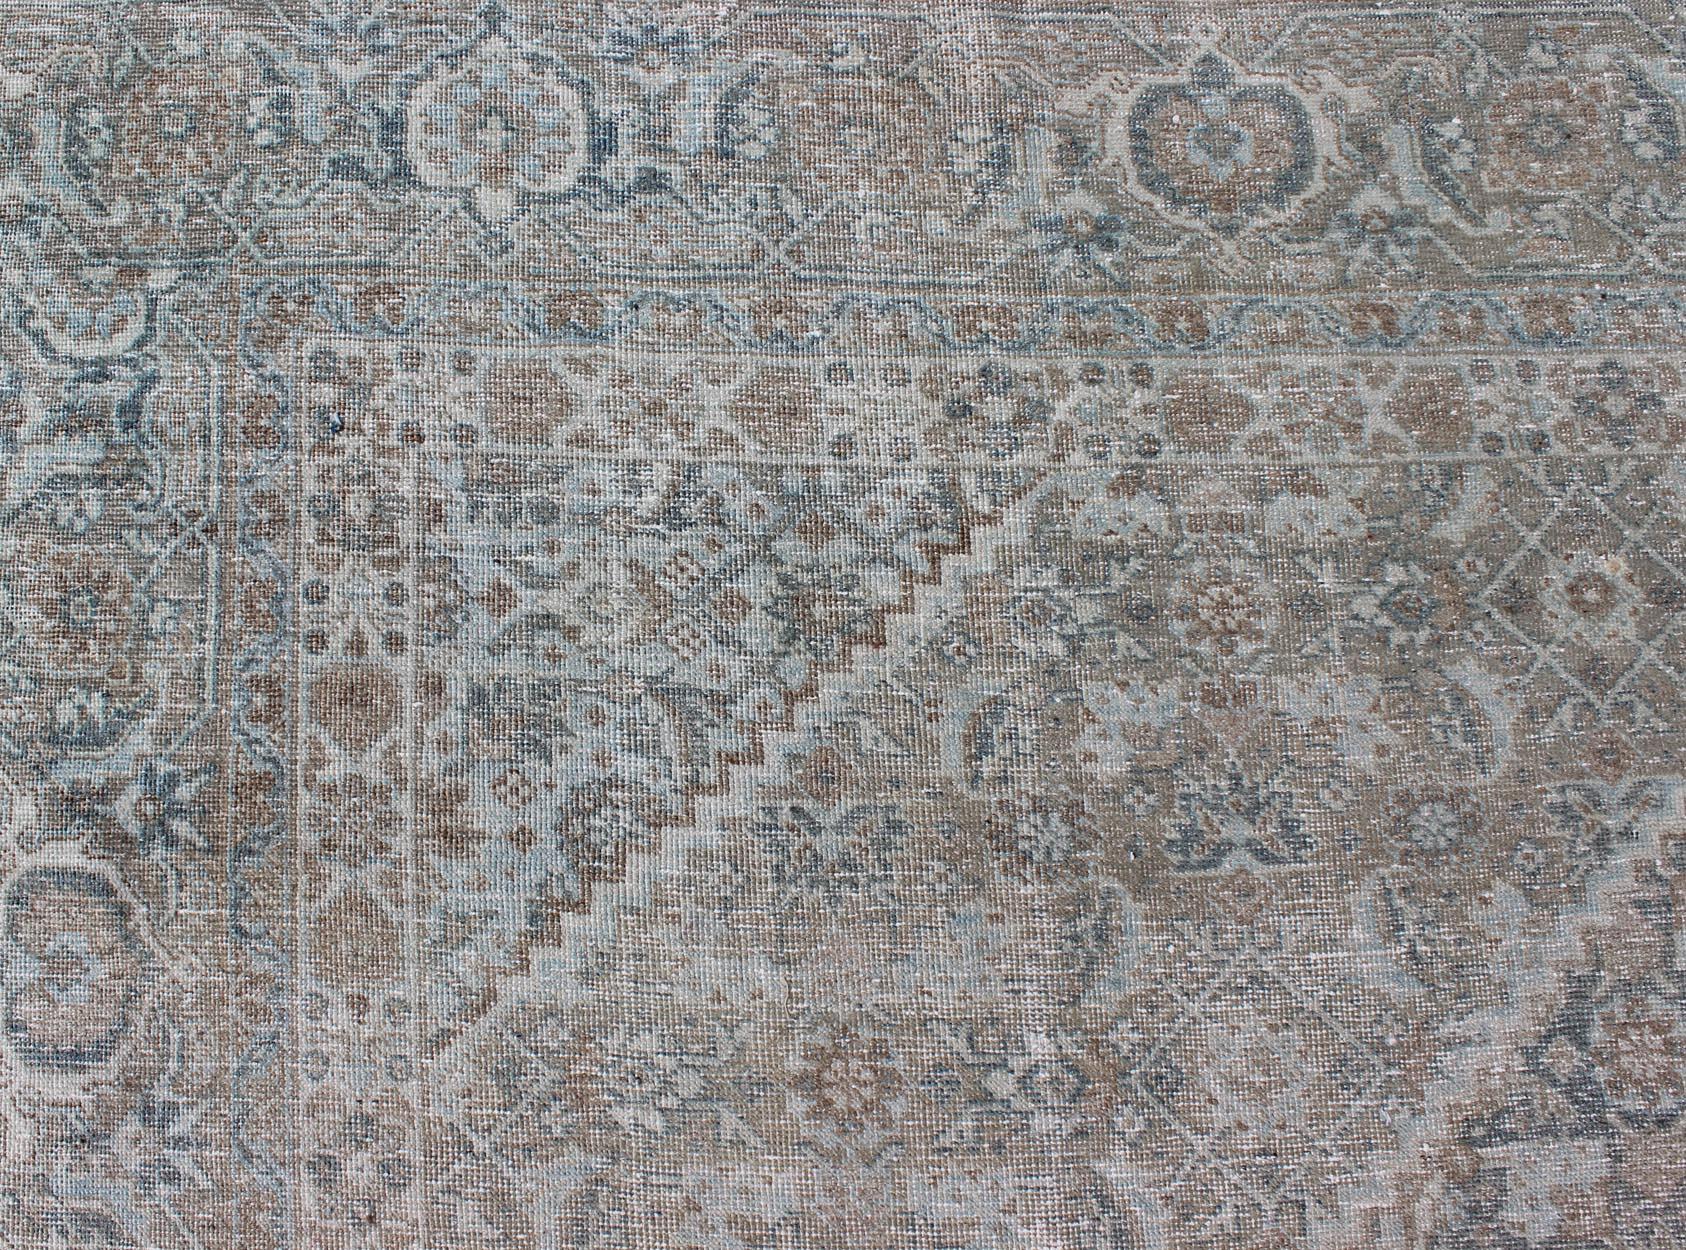 Wool Antique Persian Tabriz Rug in Muted Colors with Layered Medallion Design